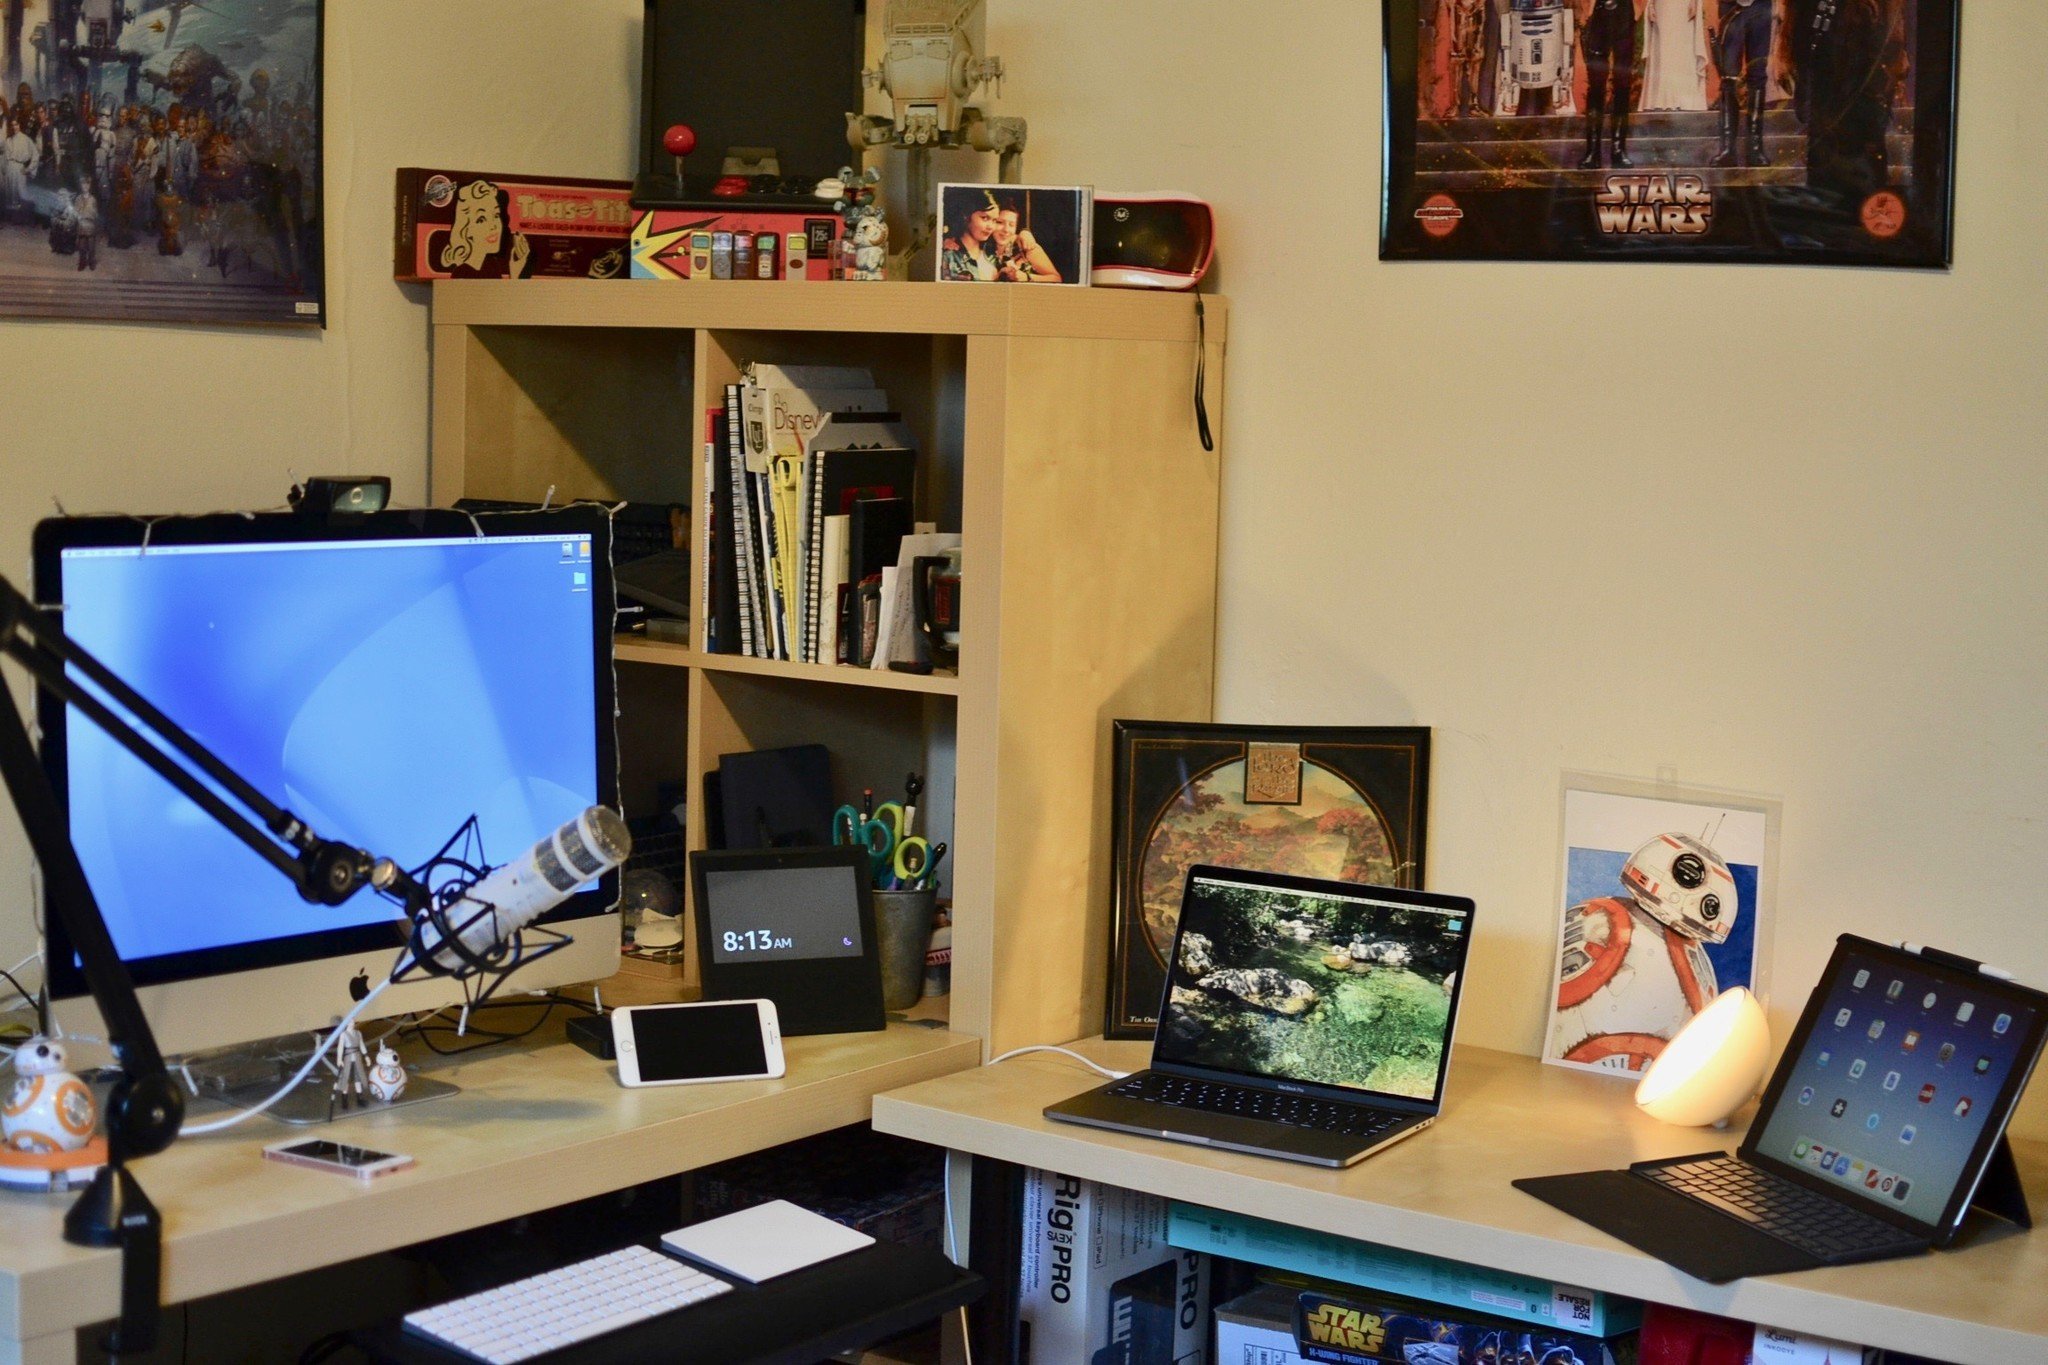 Lory's workstation